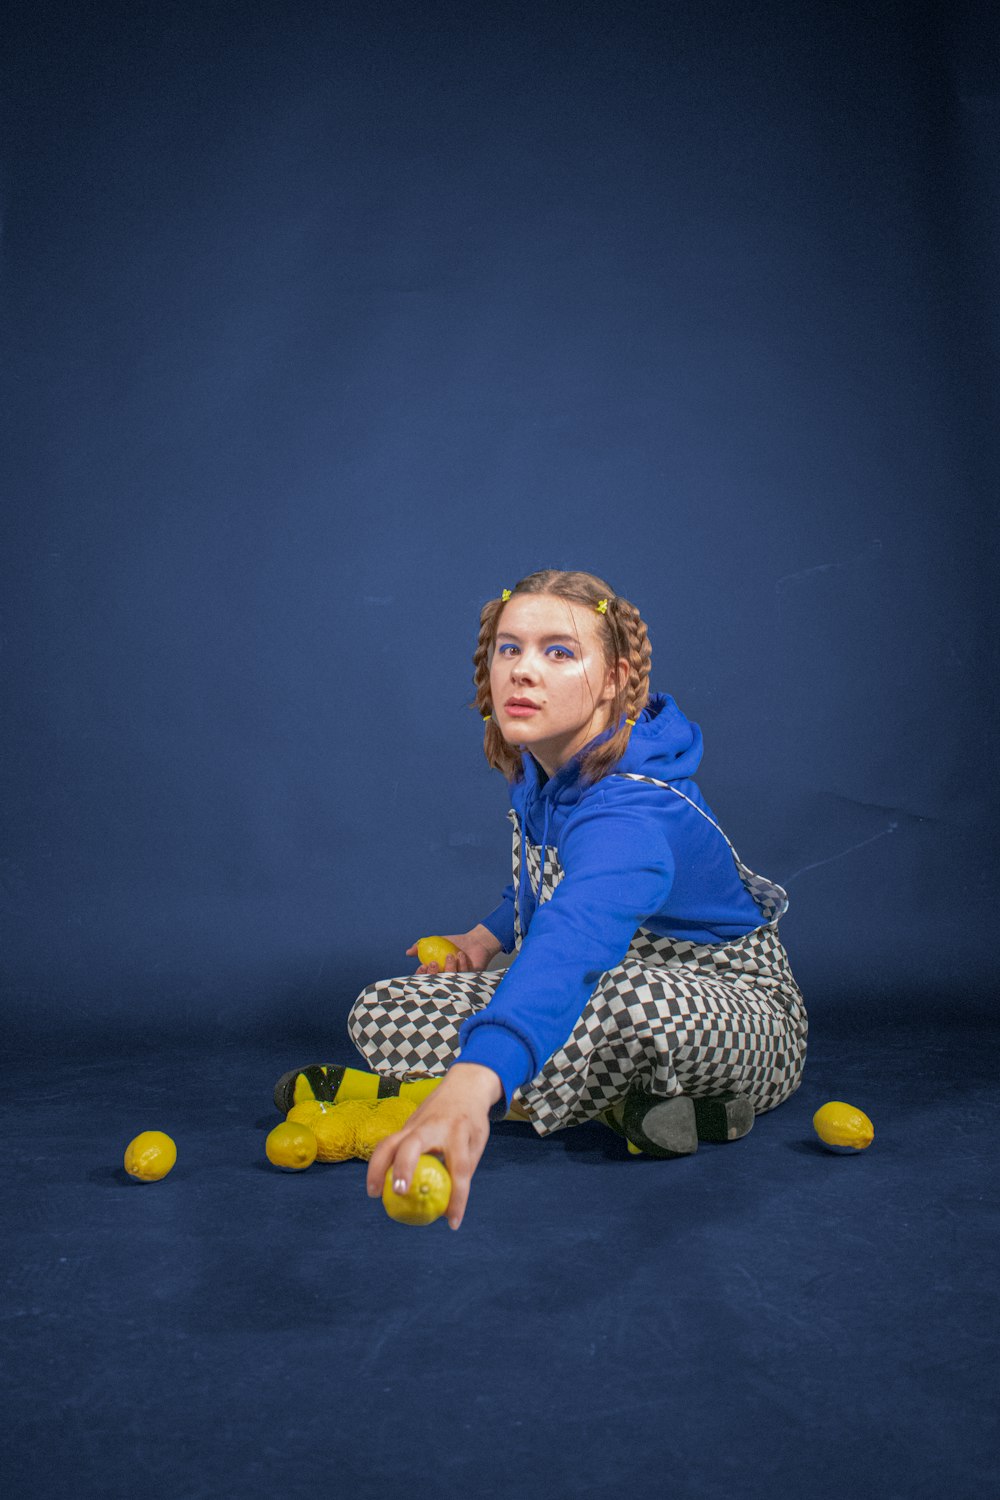 girl in blue hoodie and black and white polka dots pants sitting on floor